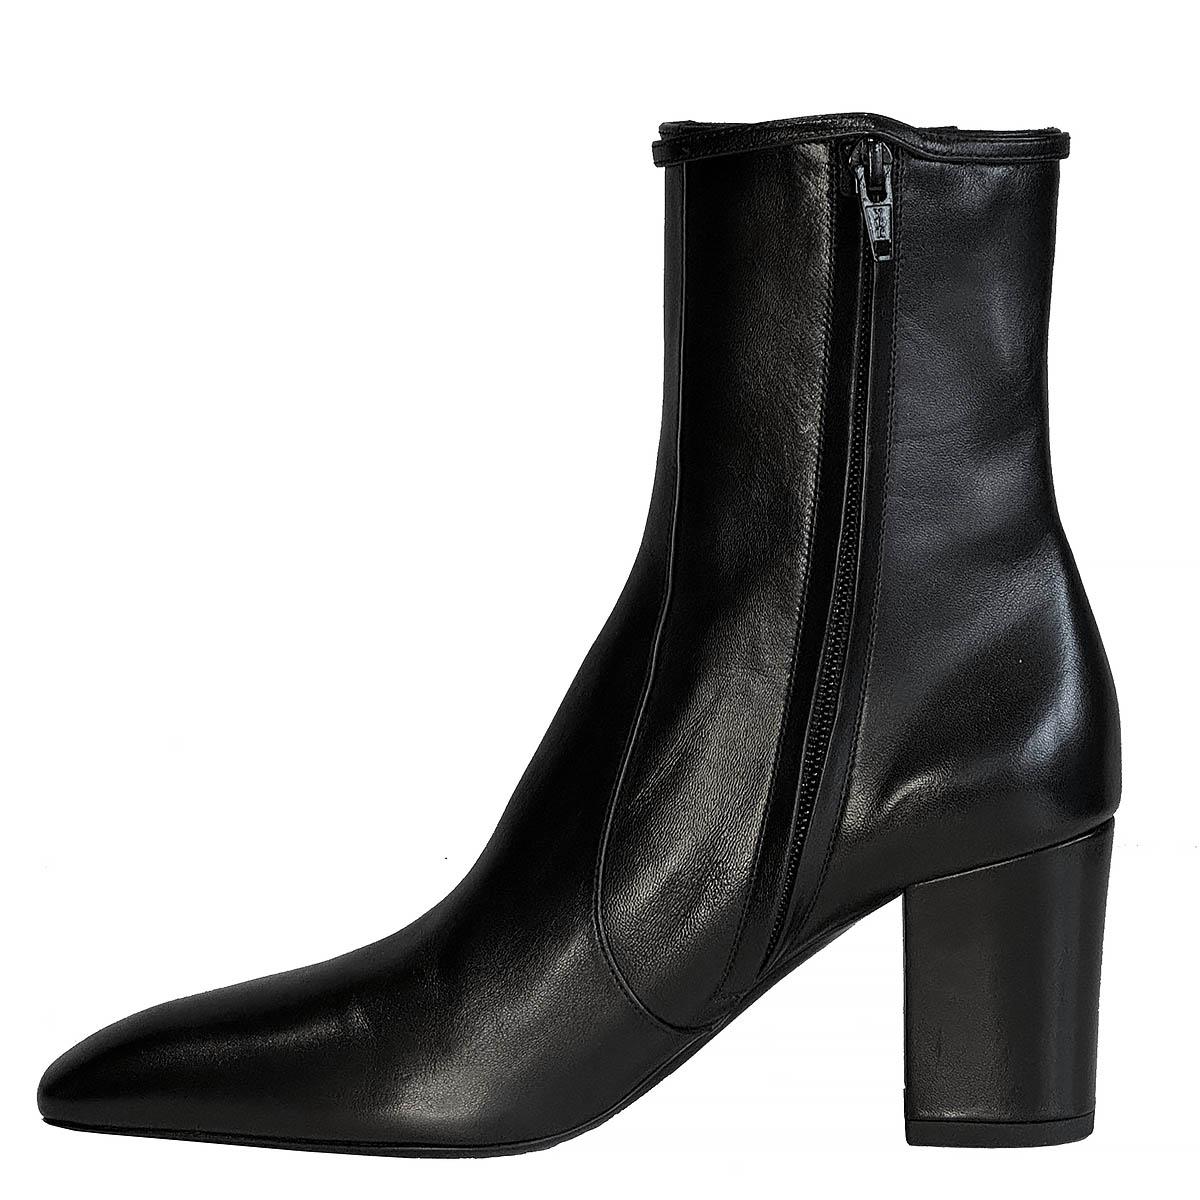 SAINT LAURENT black leather BETTY 70 Ankle Boots Shoes 36.5 In New Condition For Sale In Zürich, CH